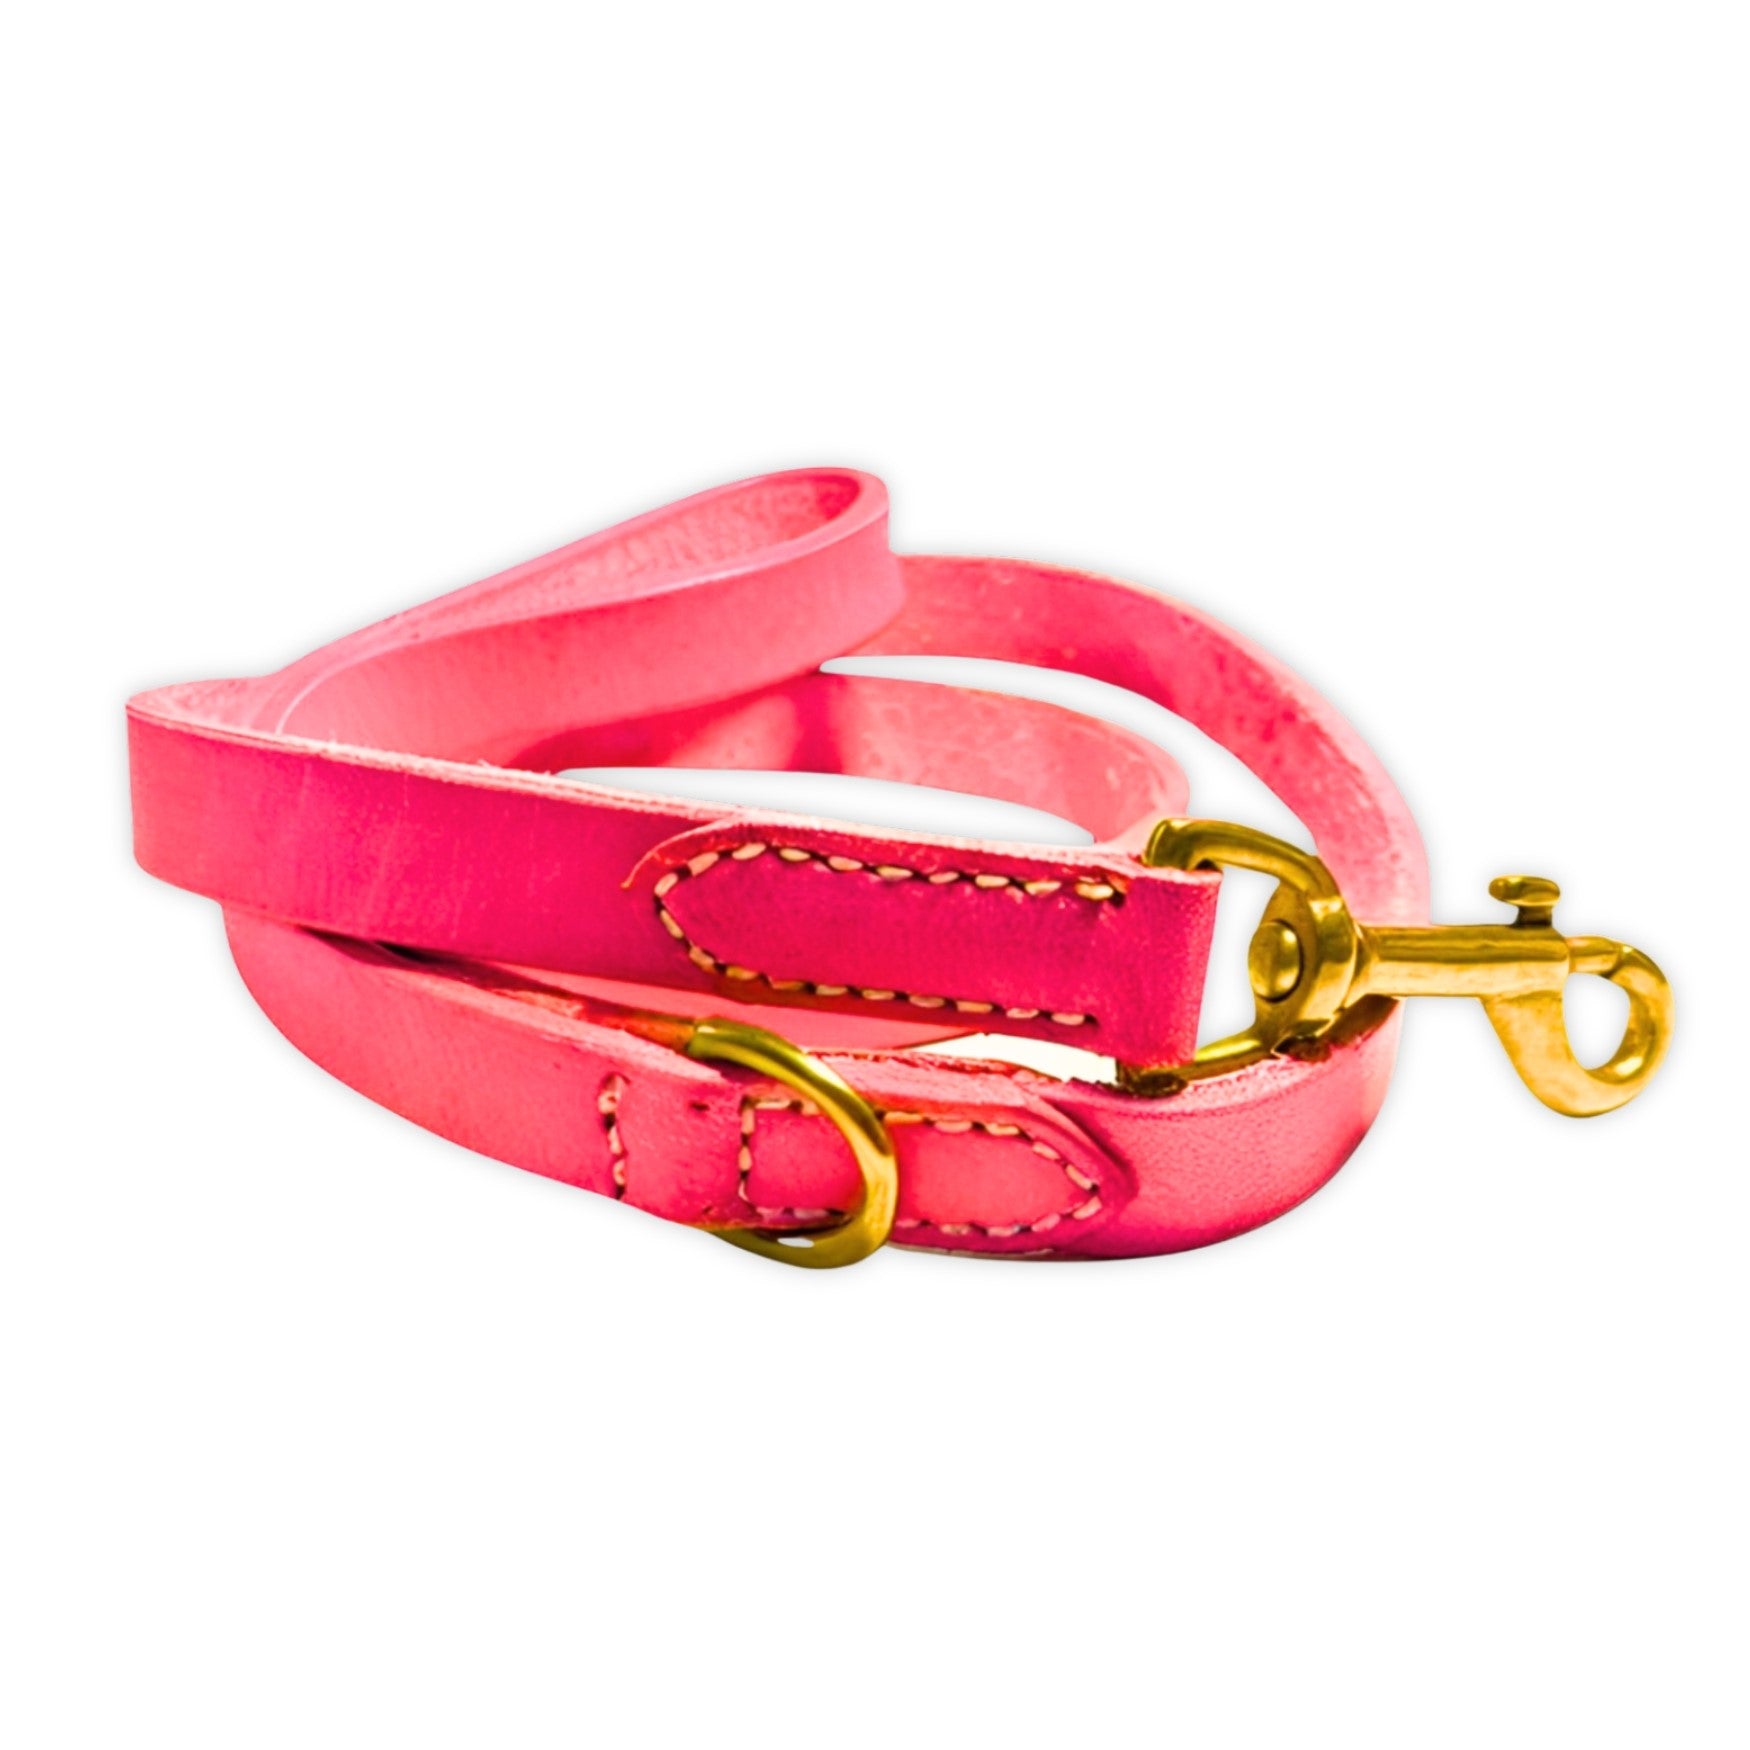 A vibrant pink leather dog leash with meticulous stitching and a glossy finish, featuring a sturdy, gold-tone metal clasp against a clean white background, demonstrating the durability of the Georgie Paws Bald Lead Hot Pink.